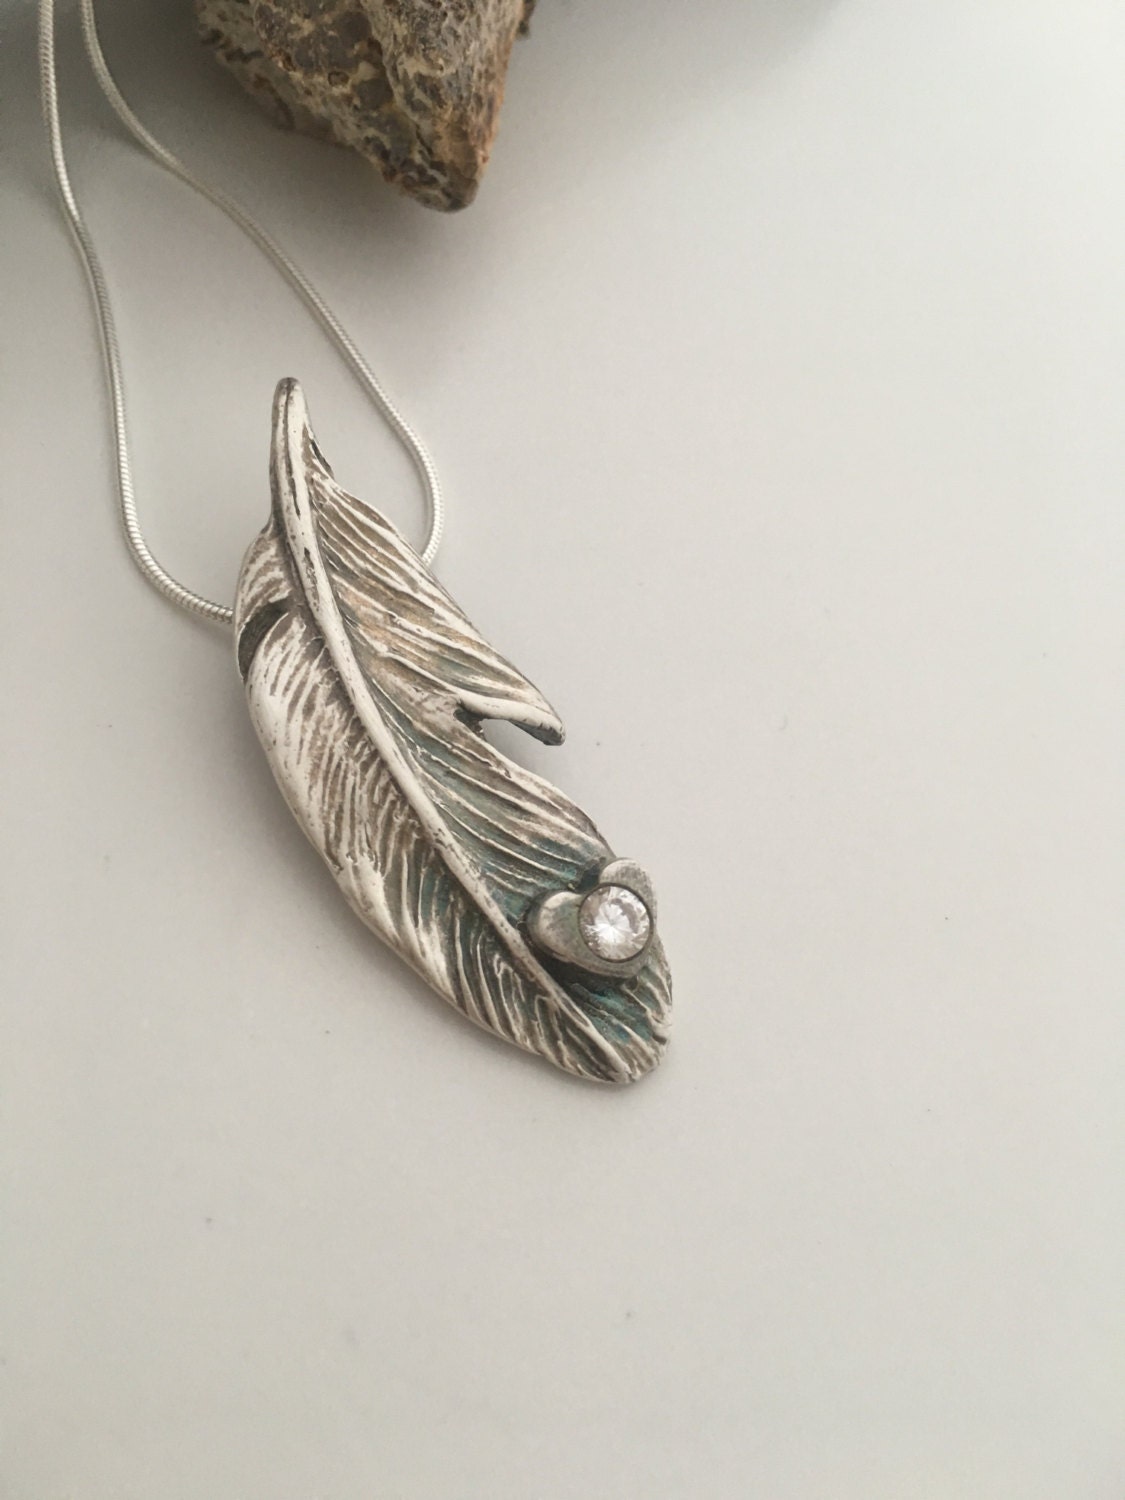 Silver Angel Feather Necklace with Crystal Heart Setting | Etsy